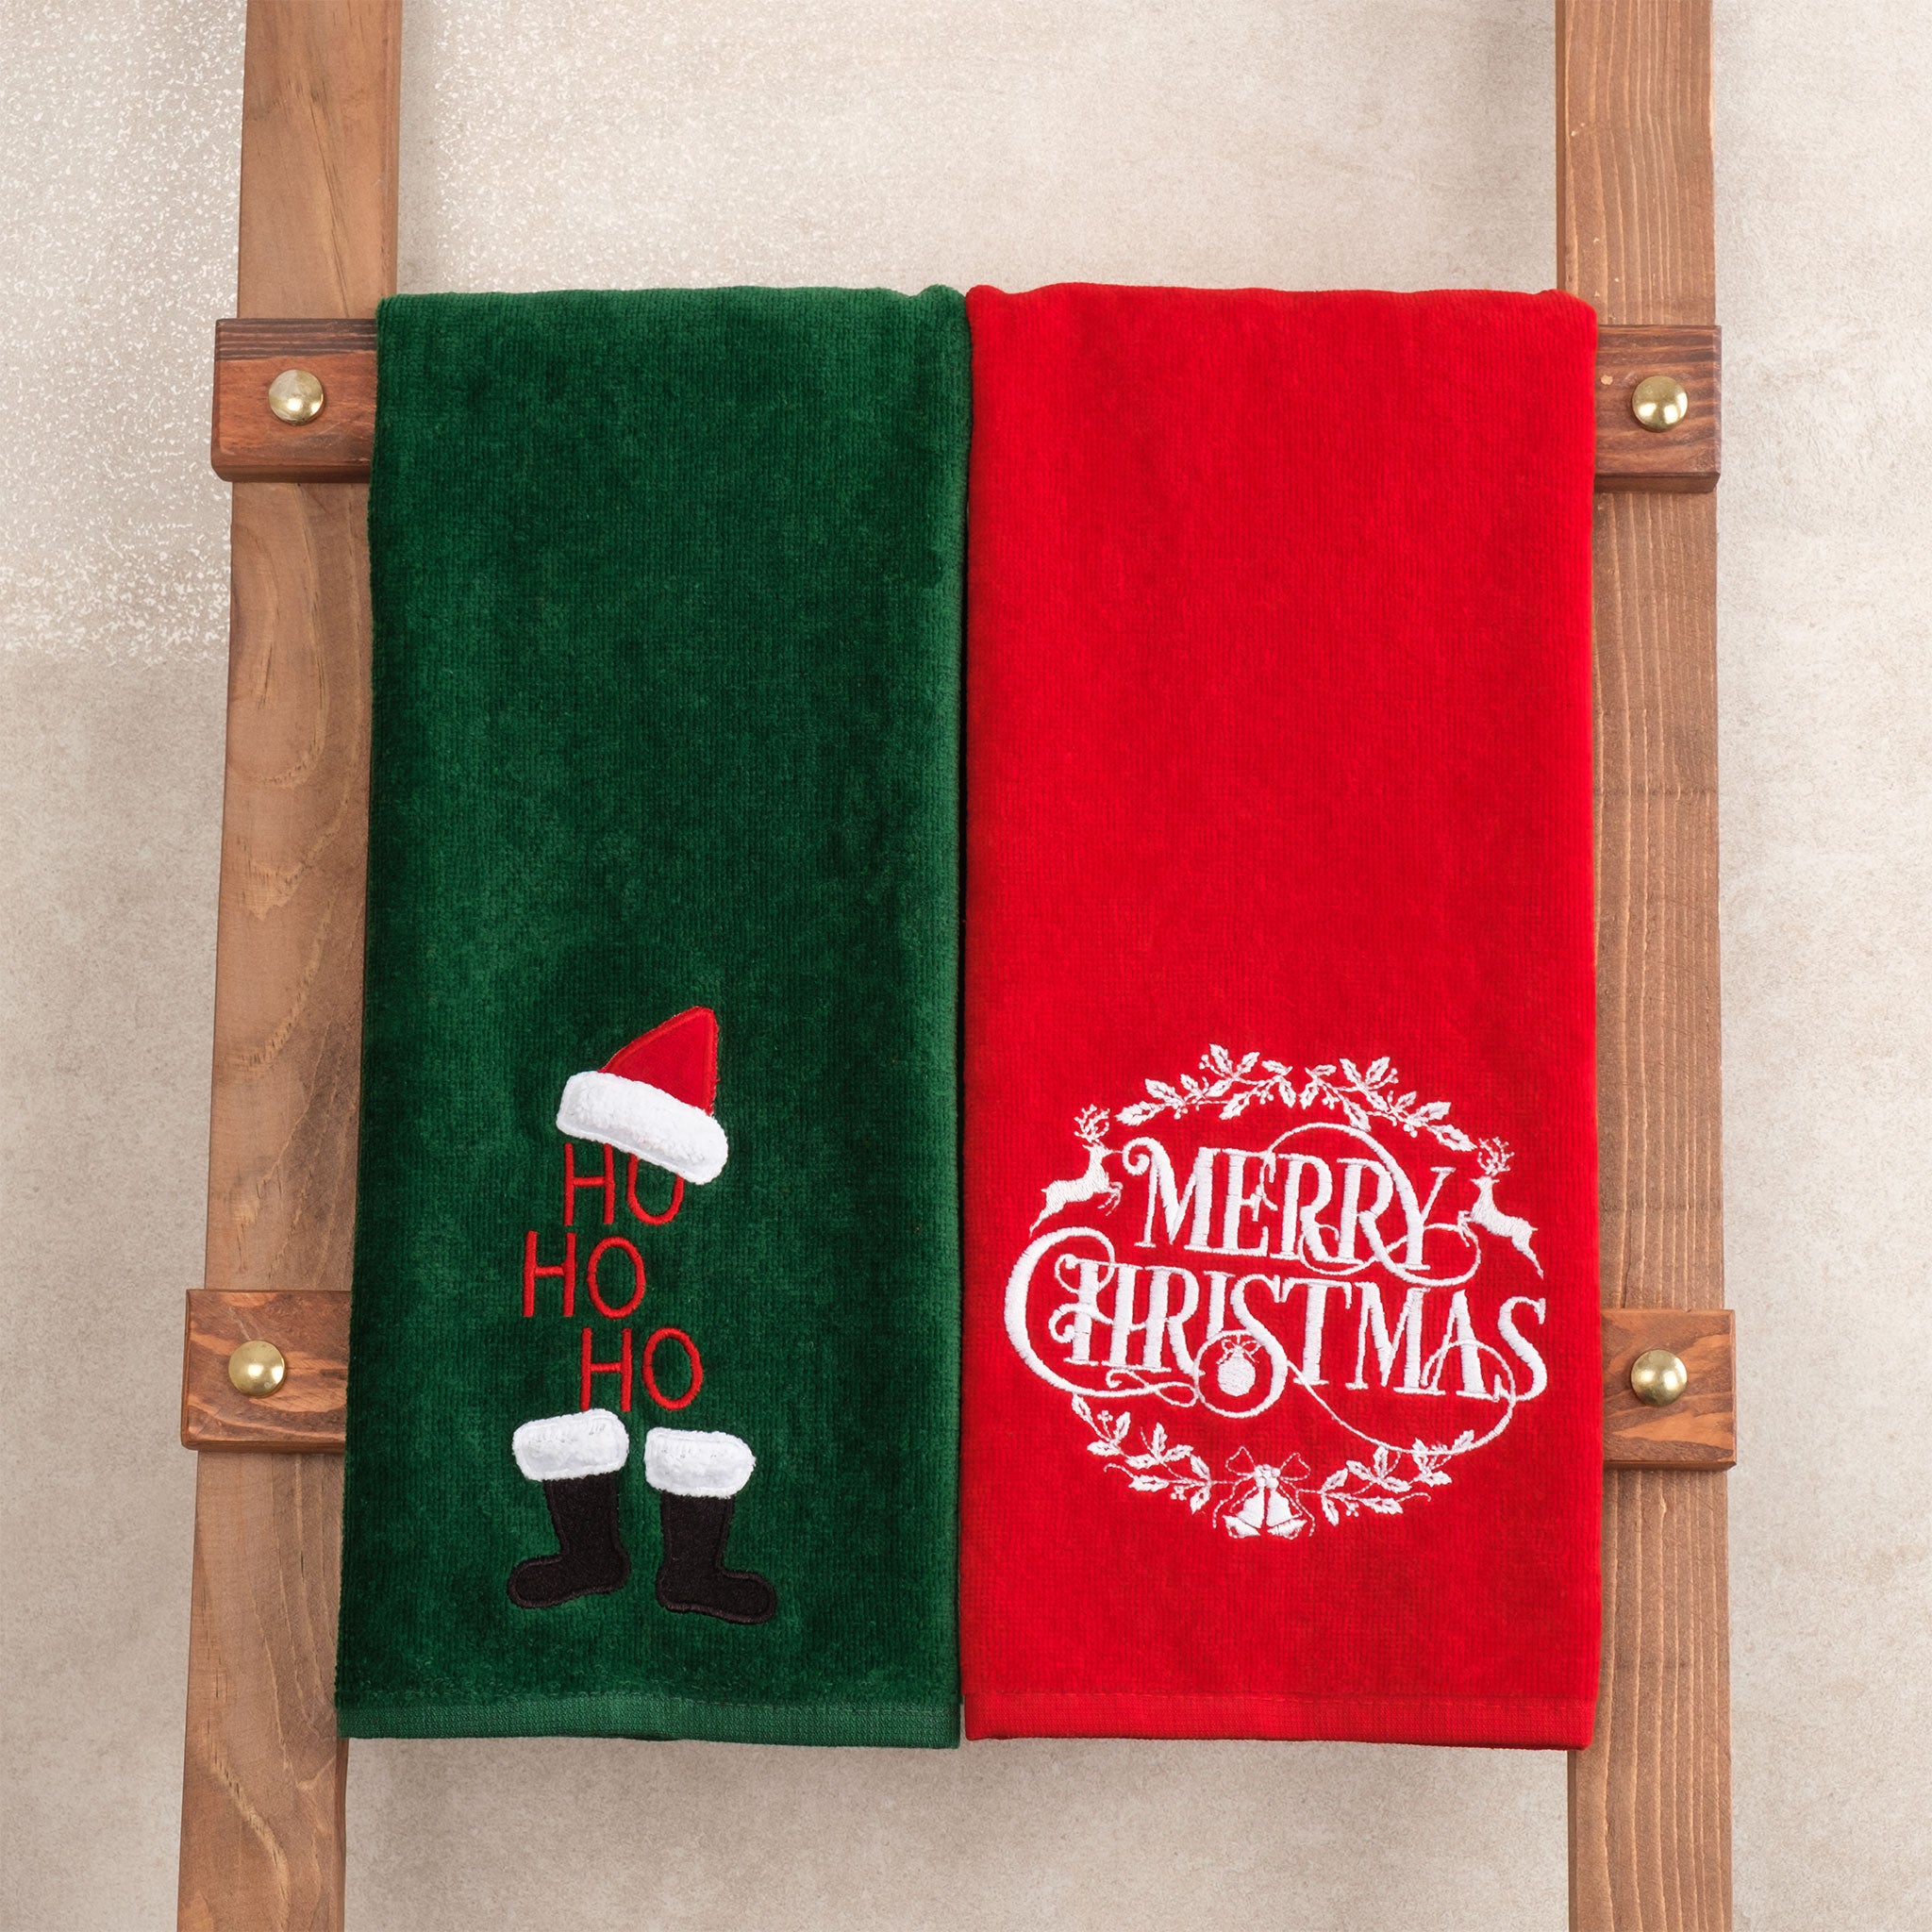 American Soft Linen - Christmas Towels 2  Packed Embroidered Towels for Decor Xmas - 60 Set Case Pack - Merry-Hoho - 6